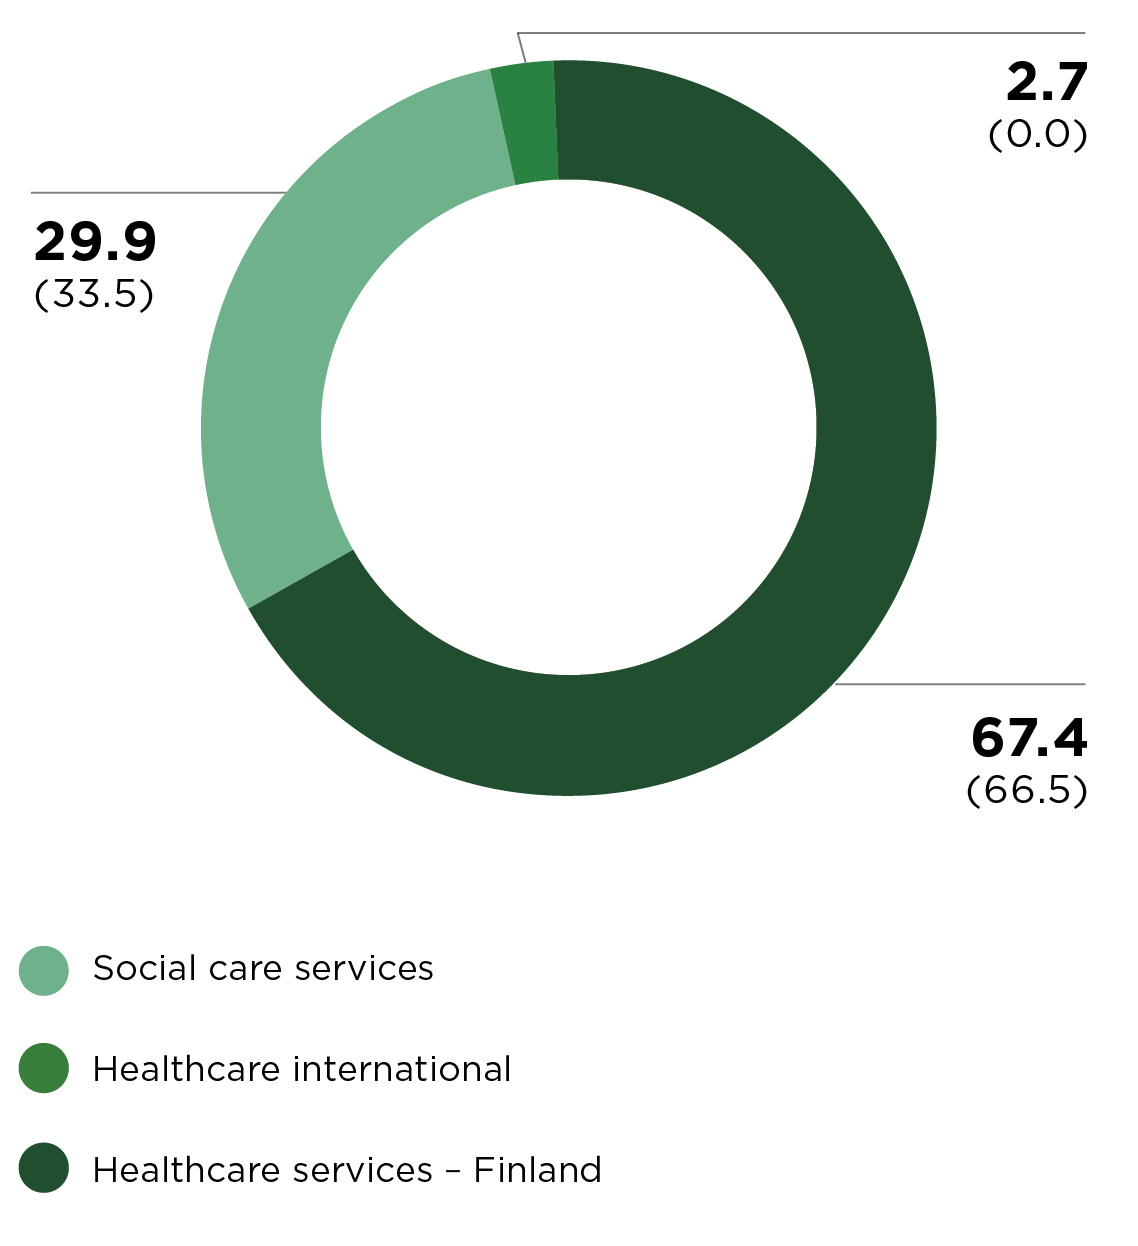 Mehiläinen's revenue by businesses in 2021. 29.9% social care services, 2.7% healthcare international and 67.4 healthcare services (Finland).